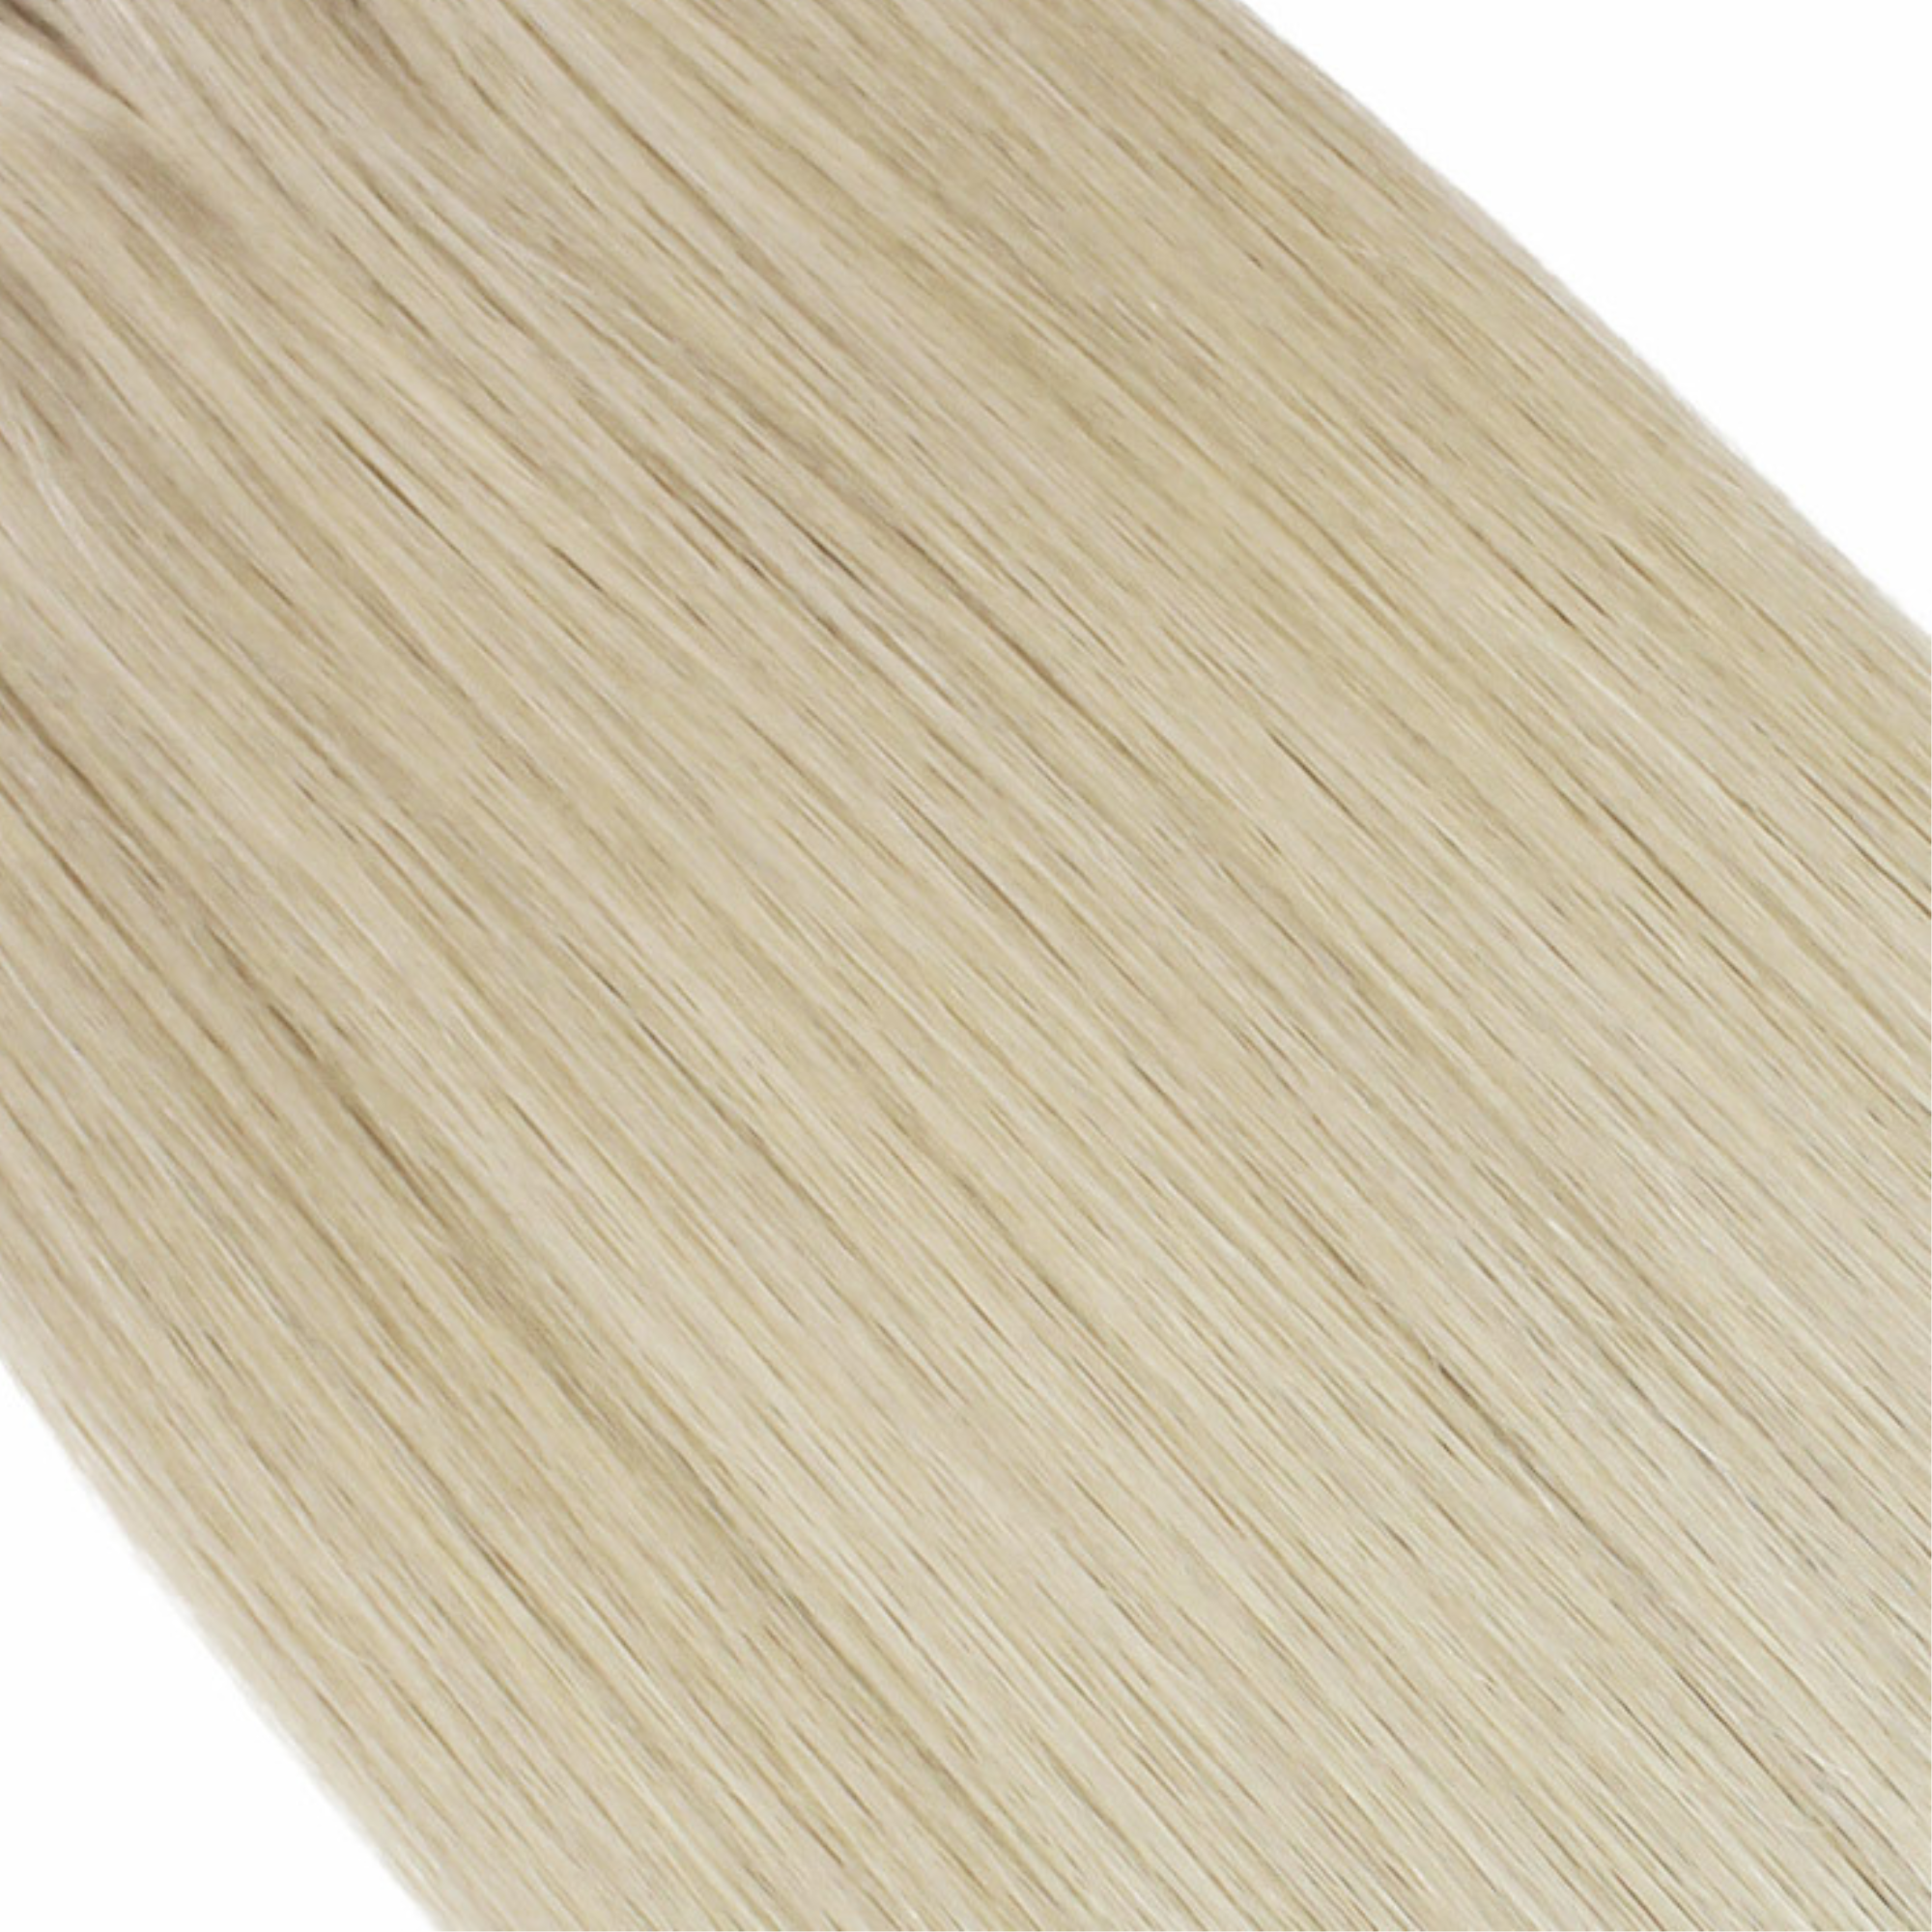 "hair rehab london 22" tape hair extensions shade swatch titled ice blonde"